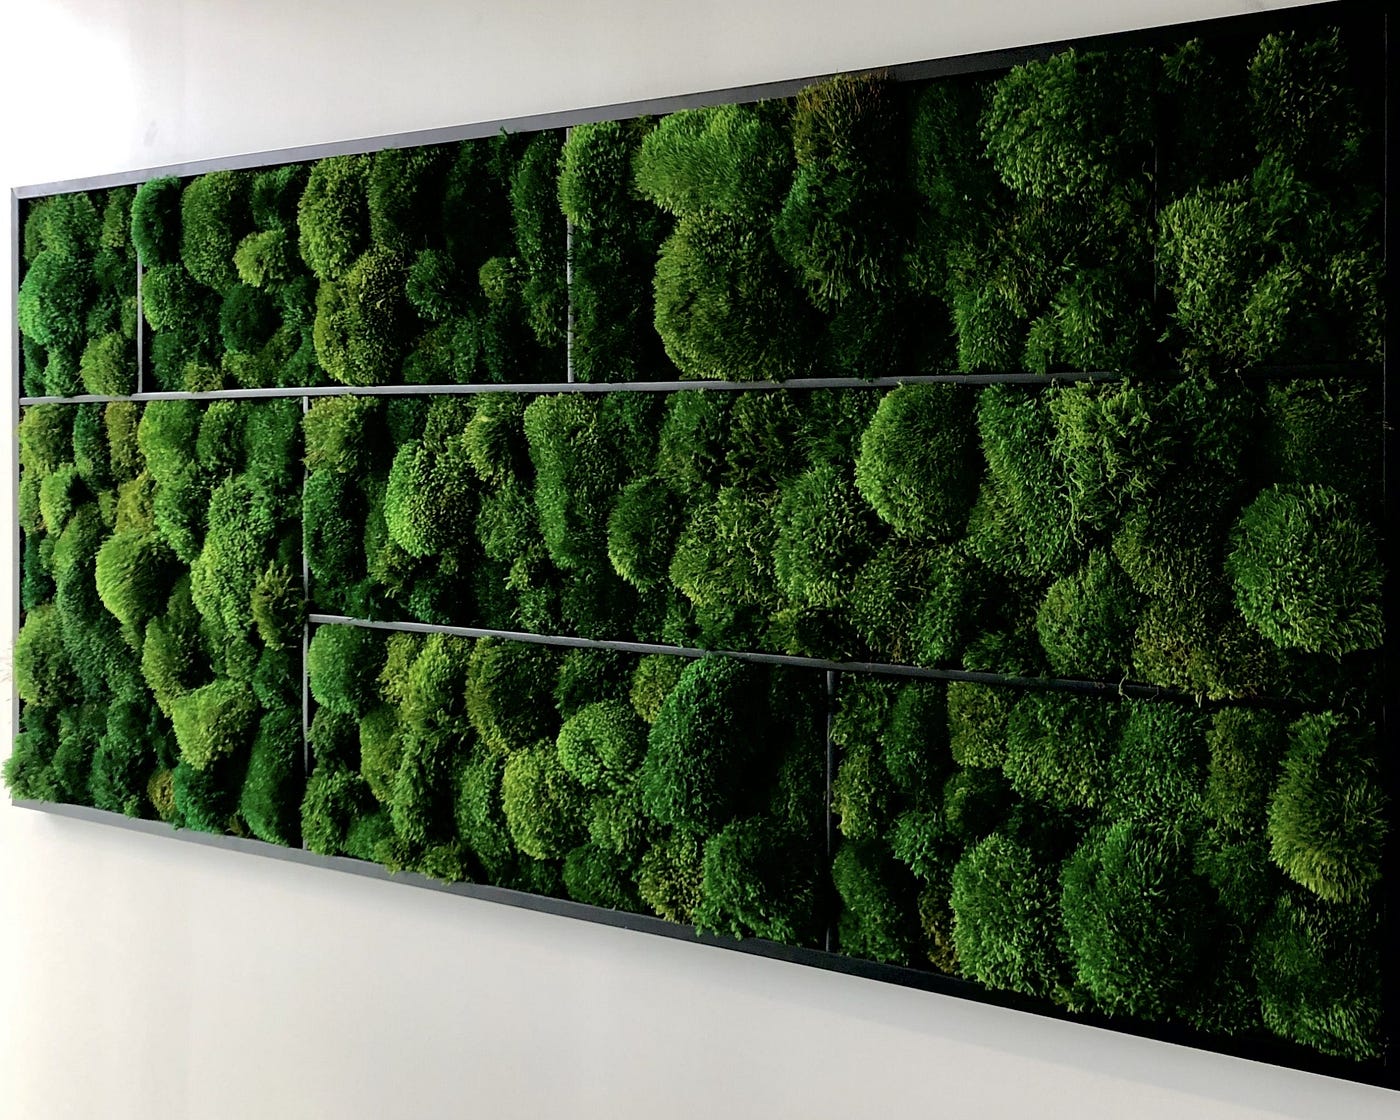 Ensuring the Lifespan of Your Indoor Moss Wall - Terra Biophilic